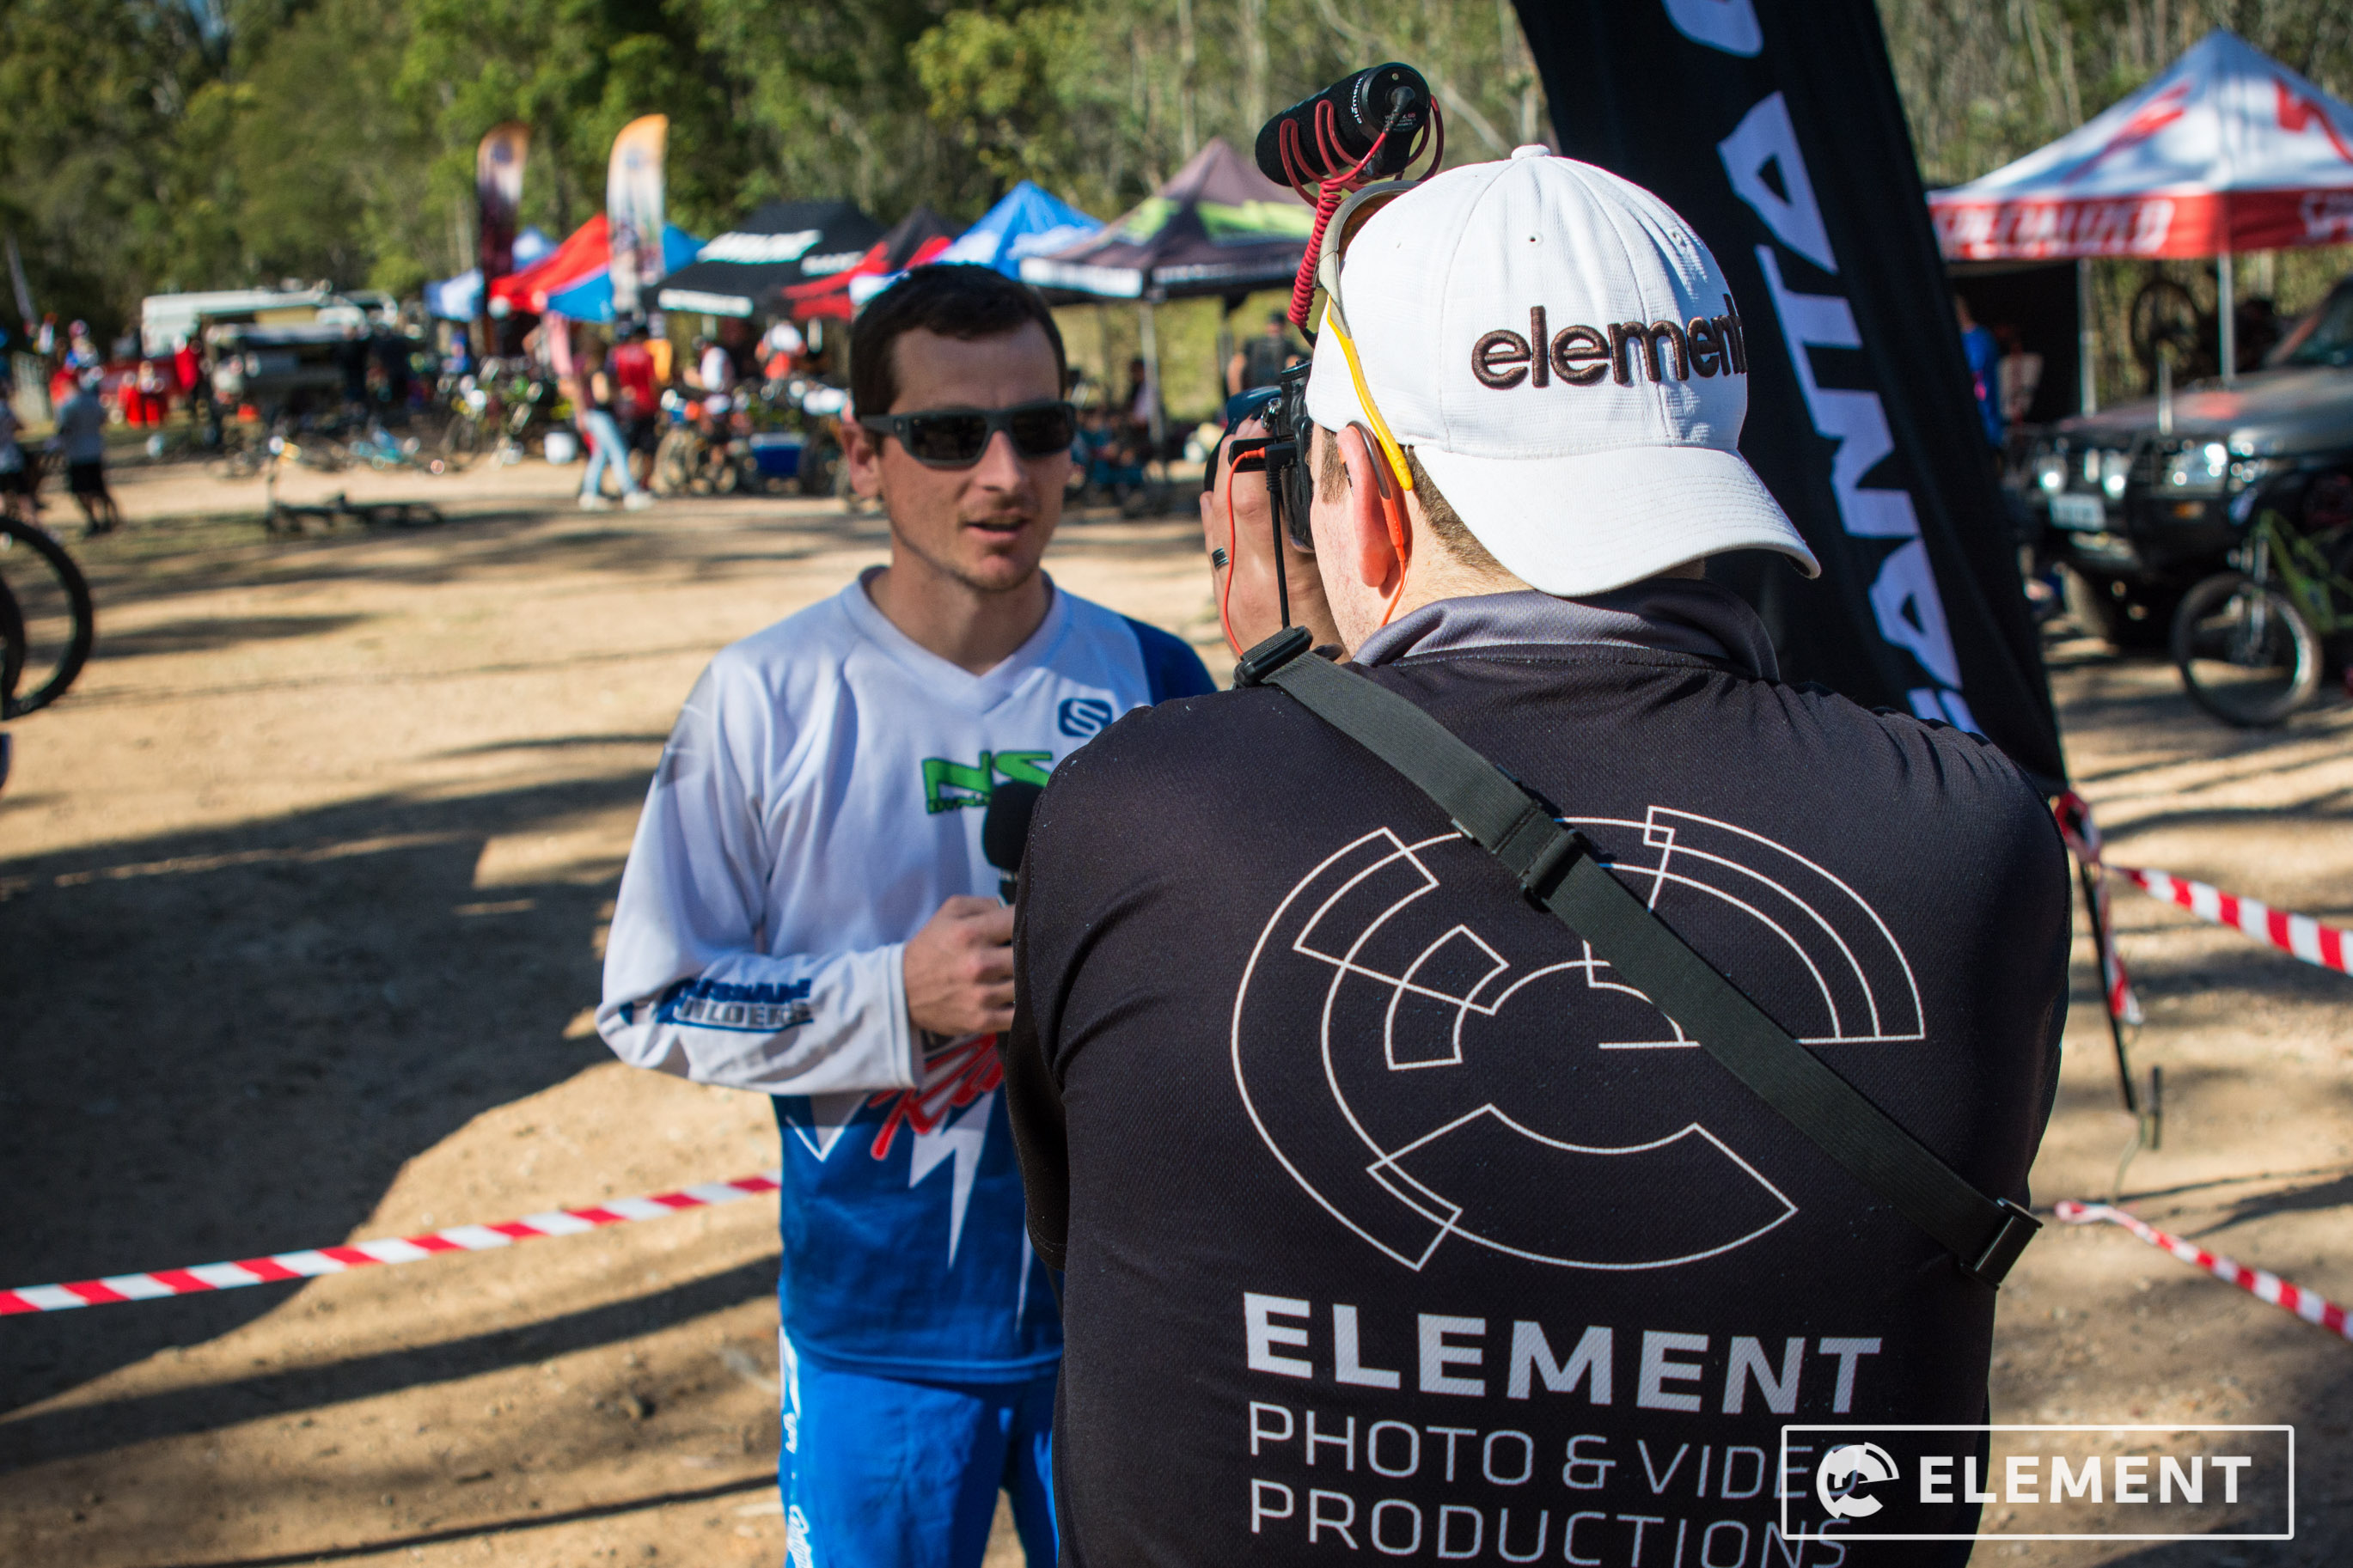 Photos from the SEQ Gravity Enduro Series, Round 4 at Toowoomba 2-8-2015. Photos by Element.